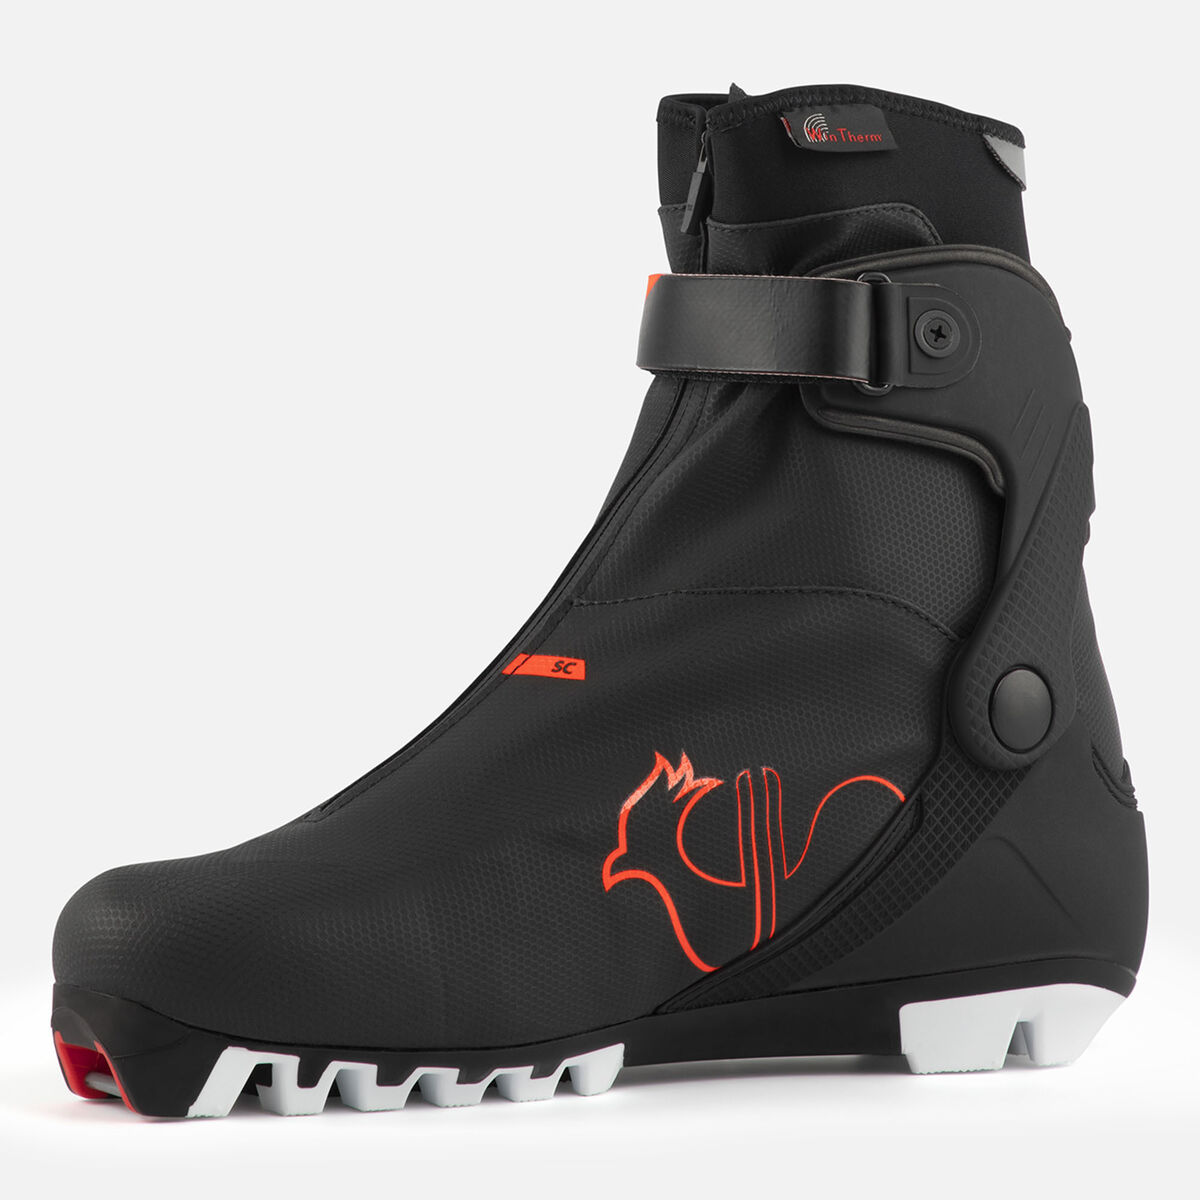 Unisex Race Skating and Classic Nordic Boots X-8